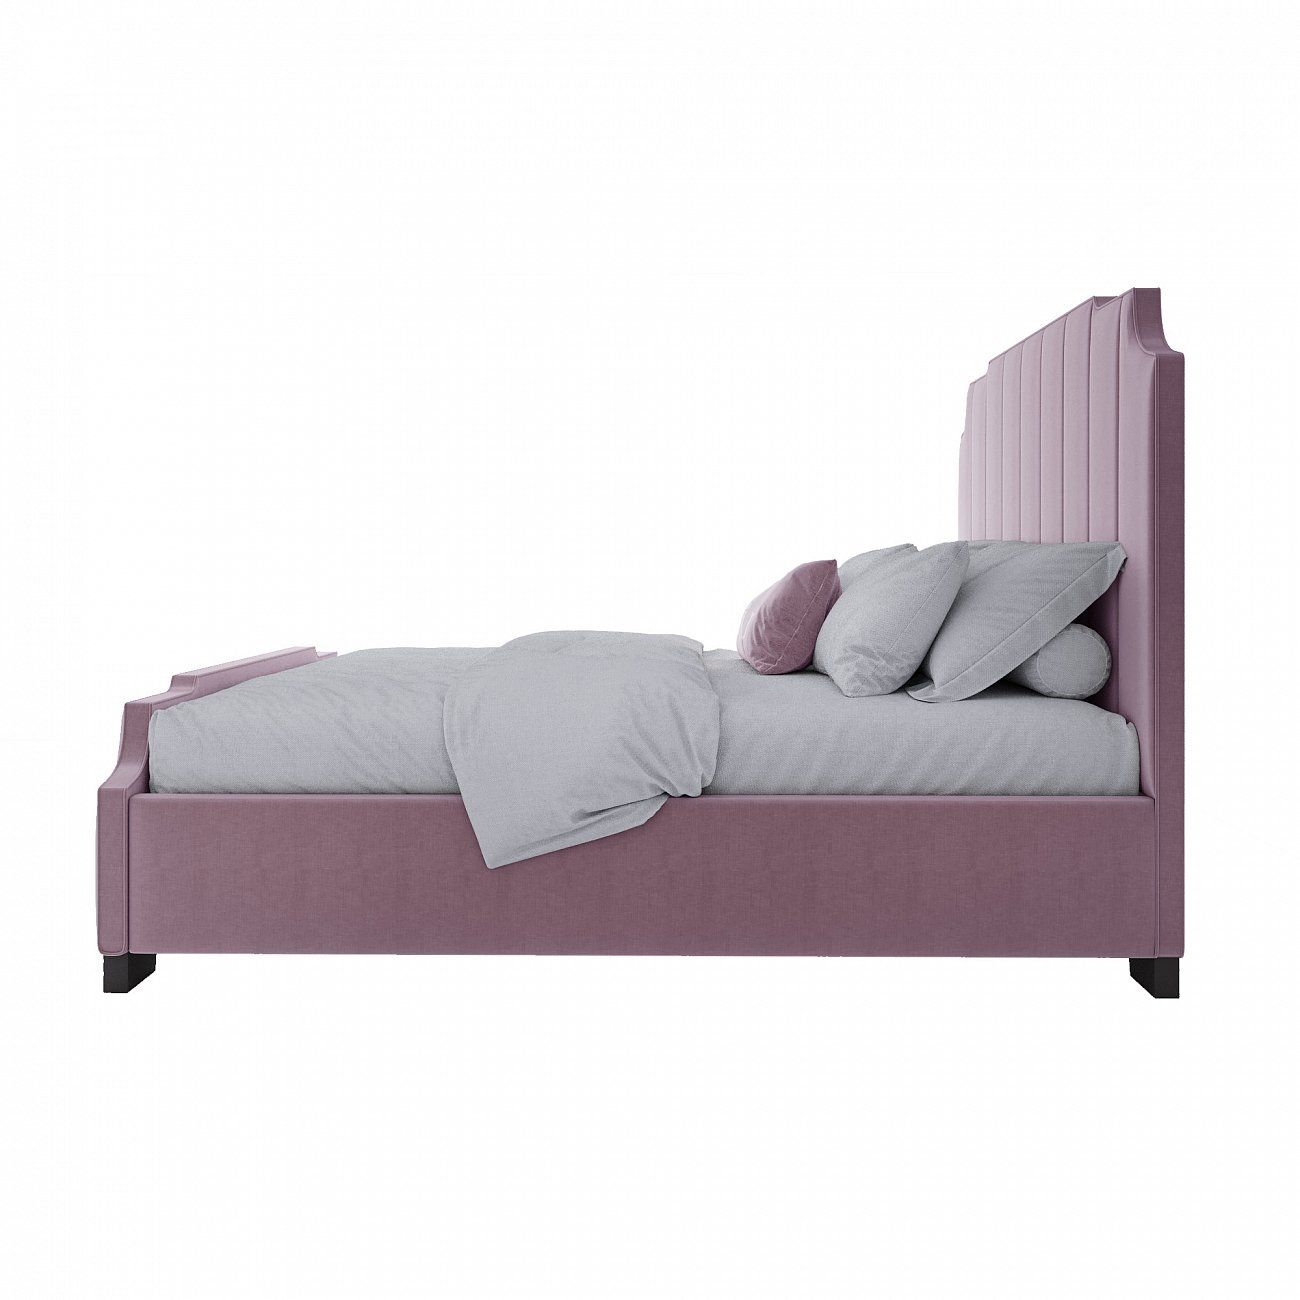 Double bed with upholstered headboard 180x200 cm light pink Bony